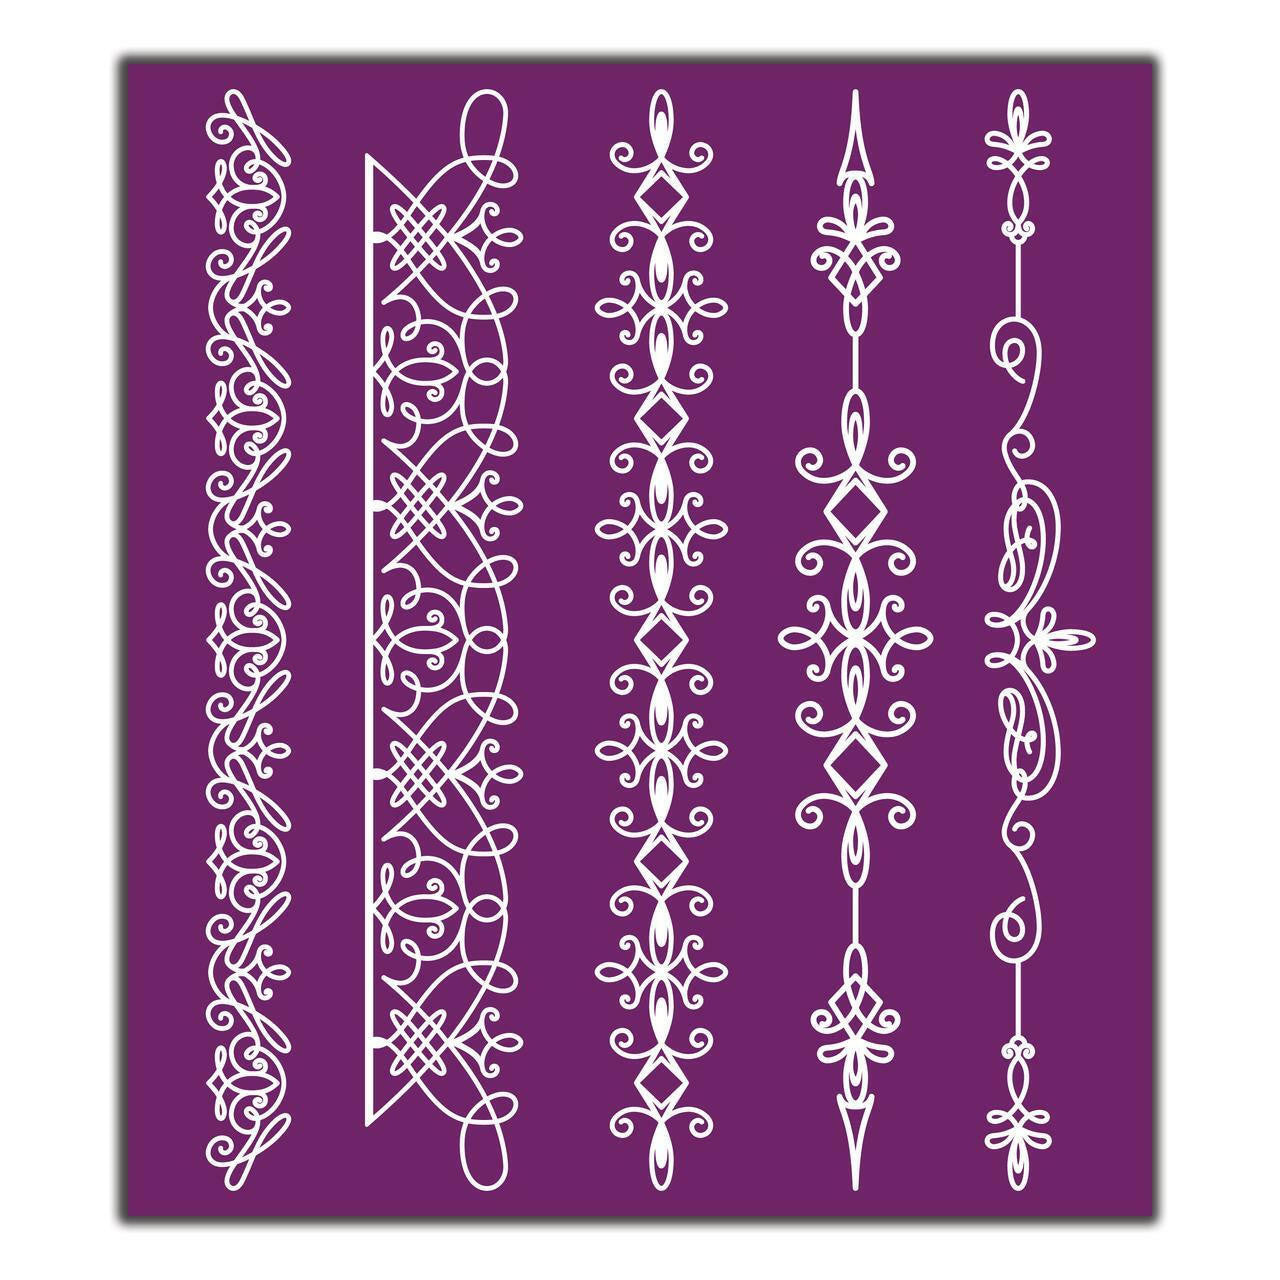 DELICATE LACE Silk Screen Stencils 3 designs 8" x 10" by Belles and Whistles